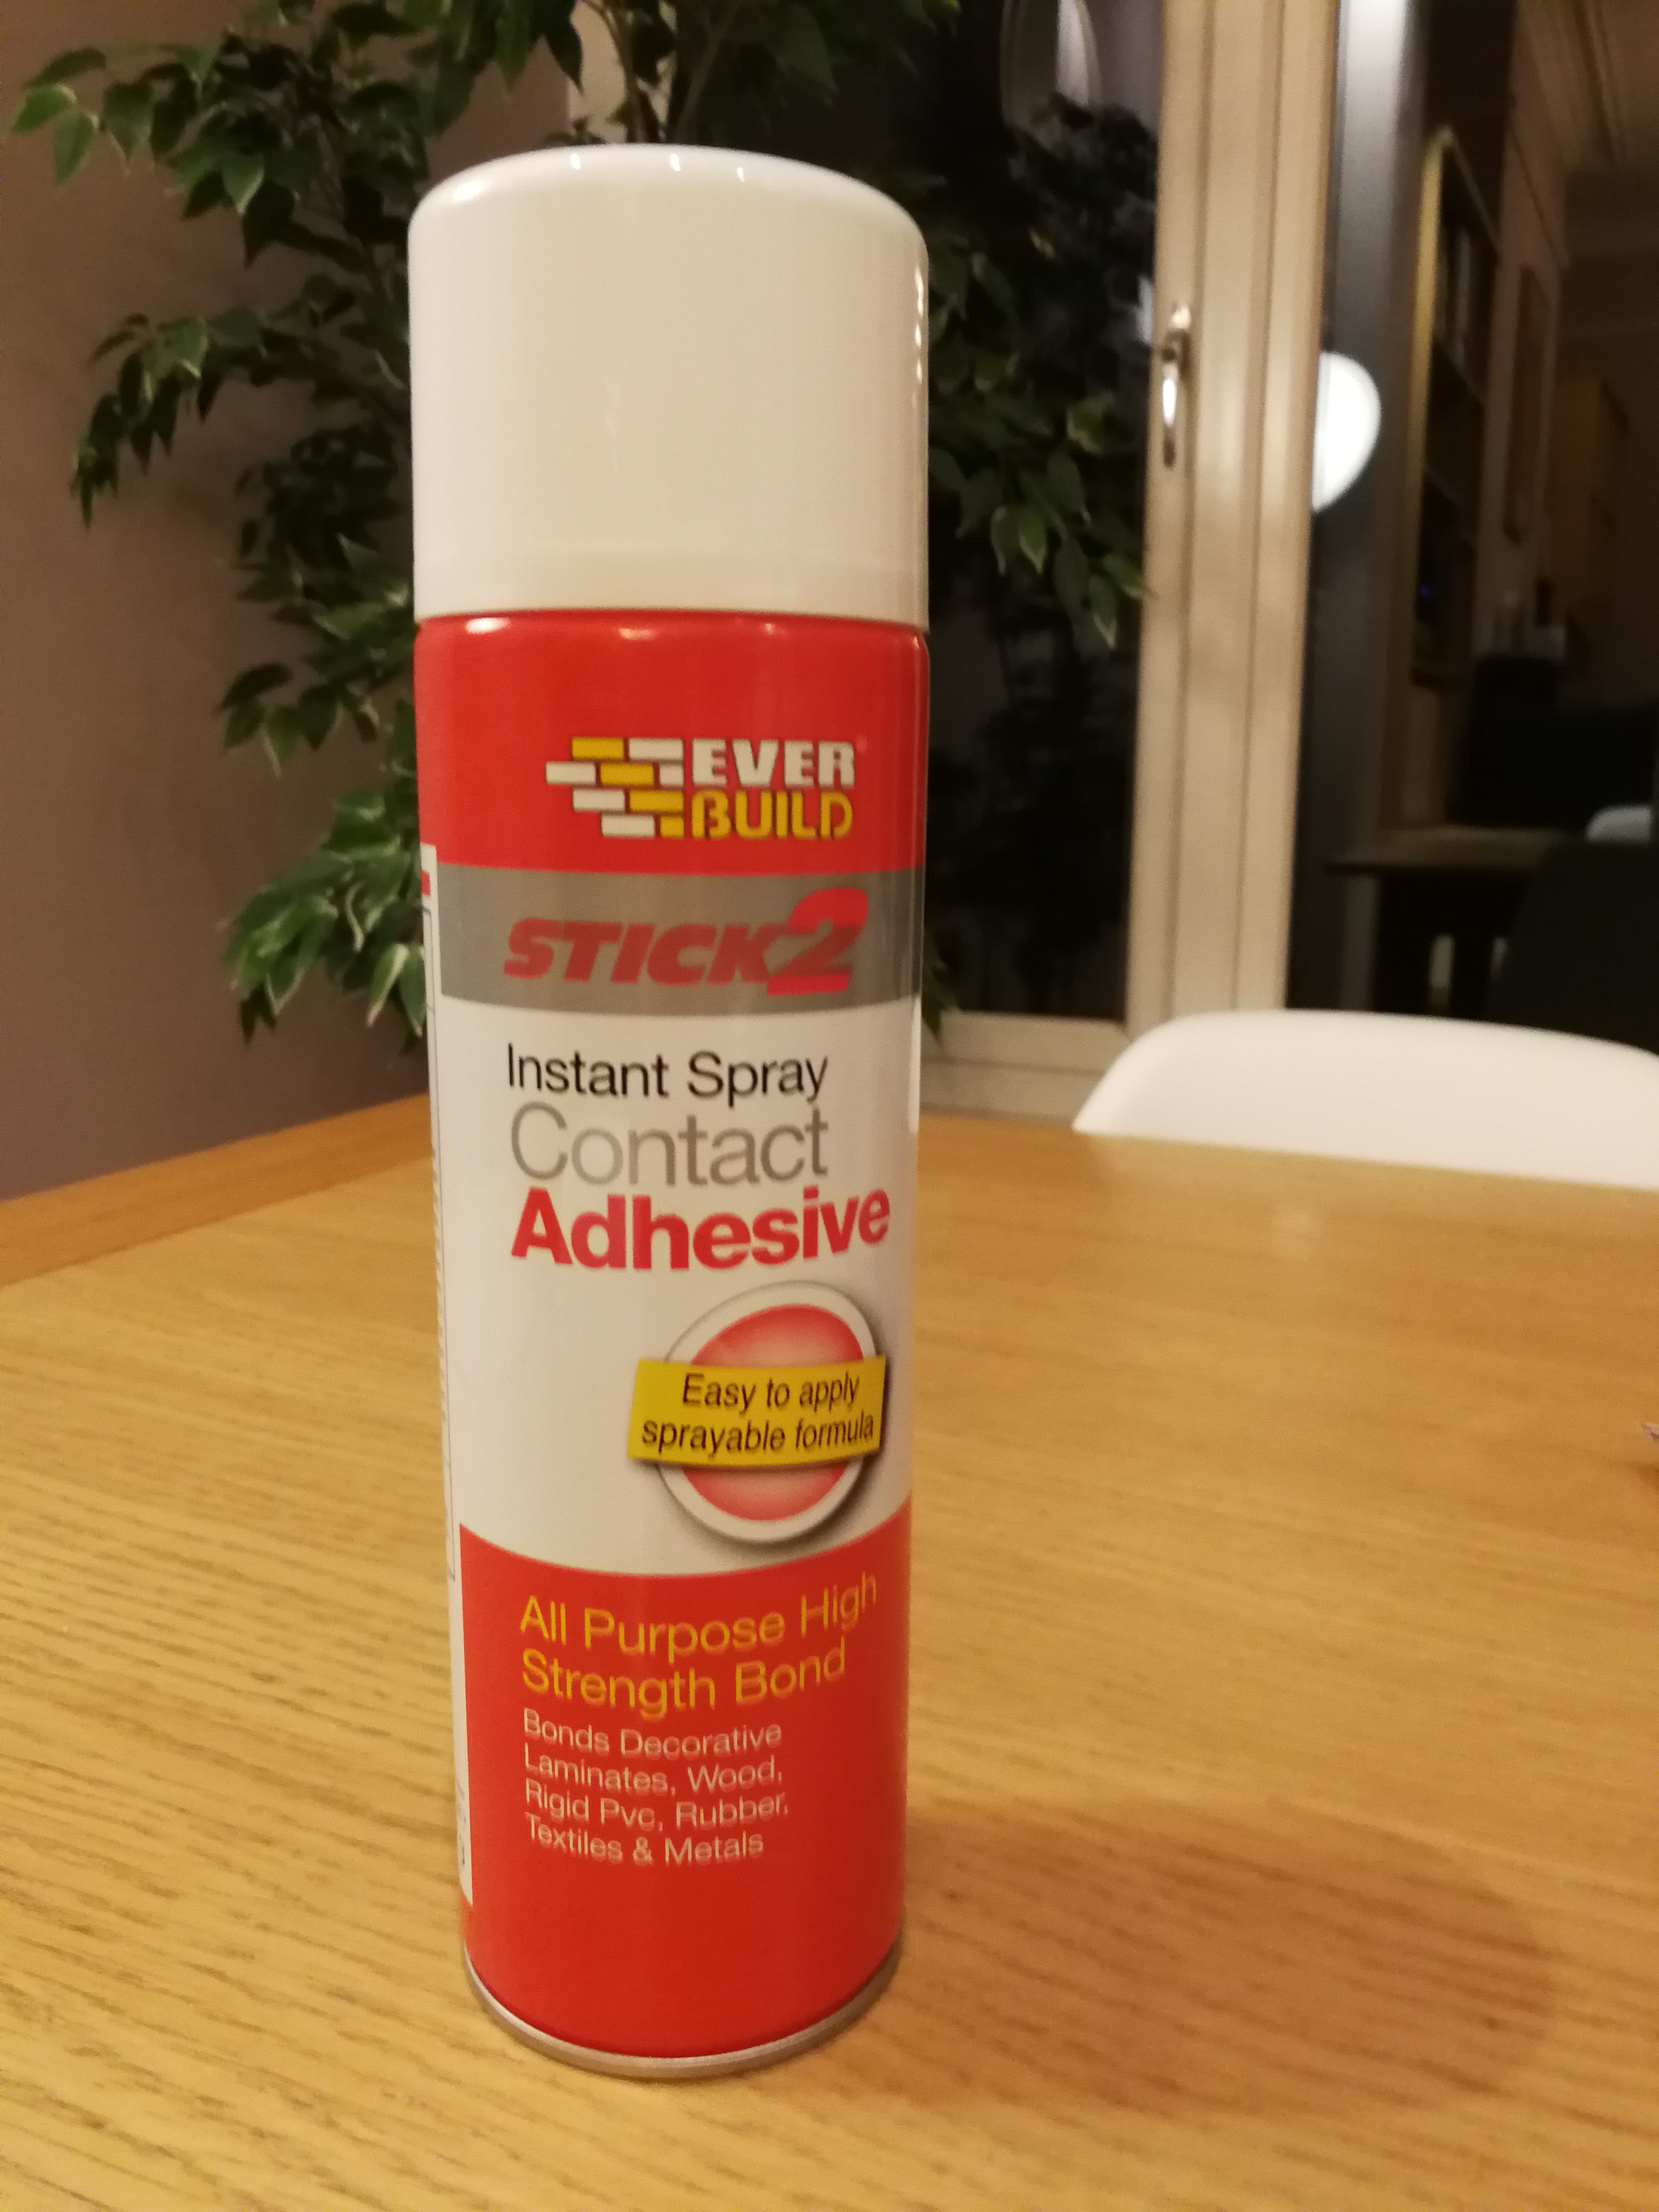 a photo of the contact adhesive I used